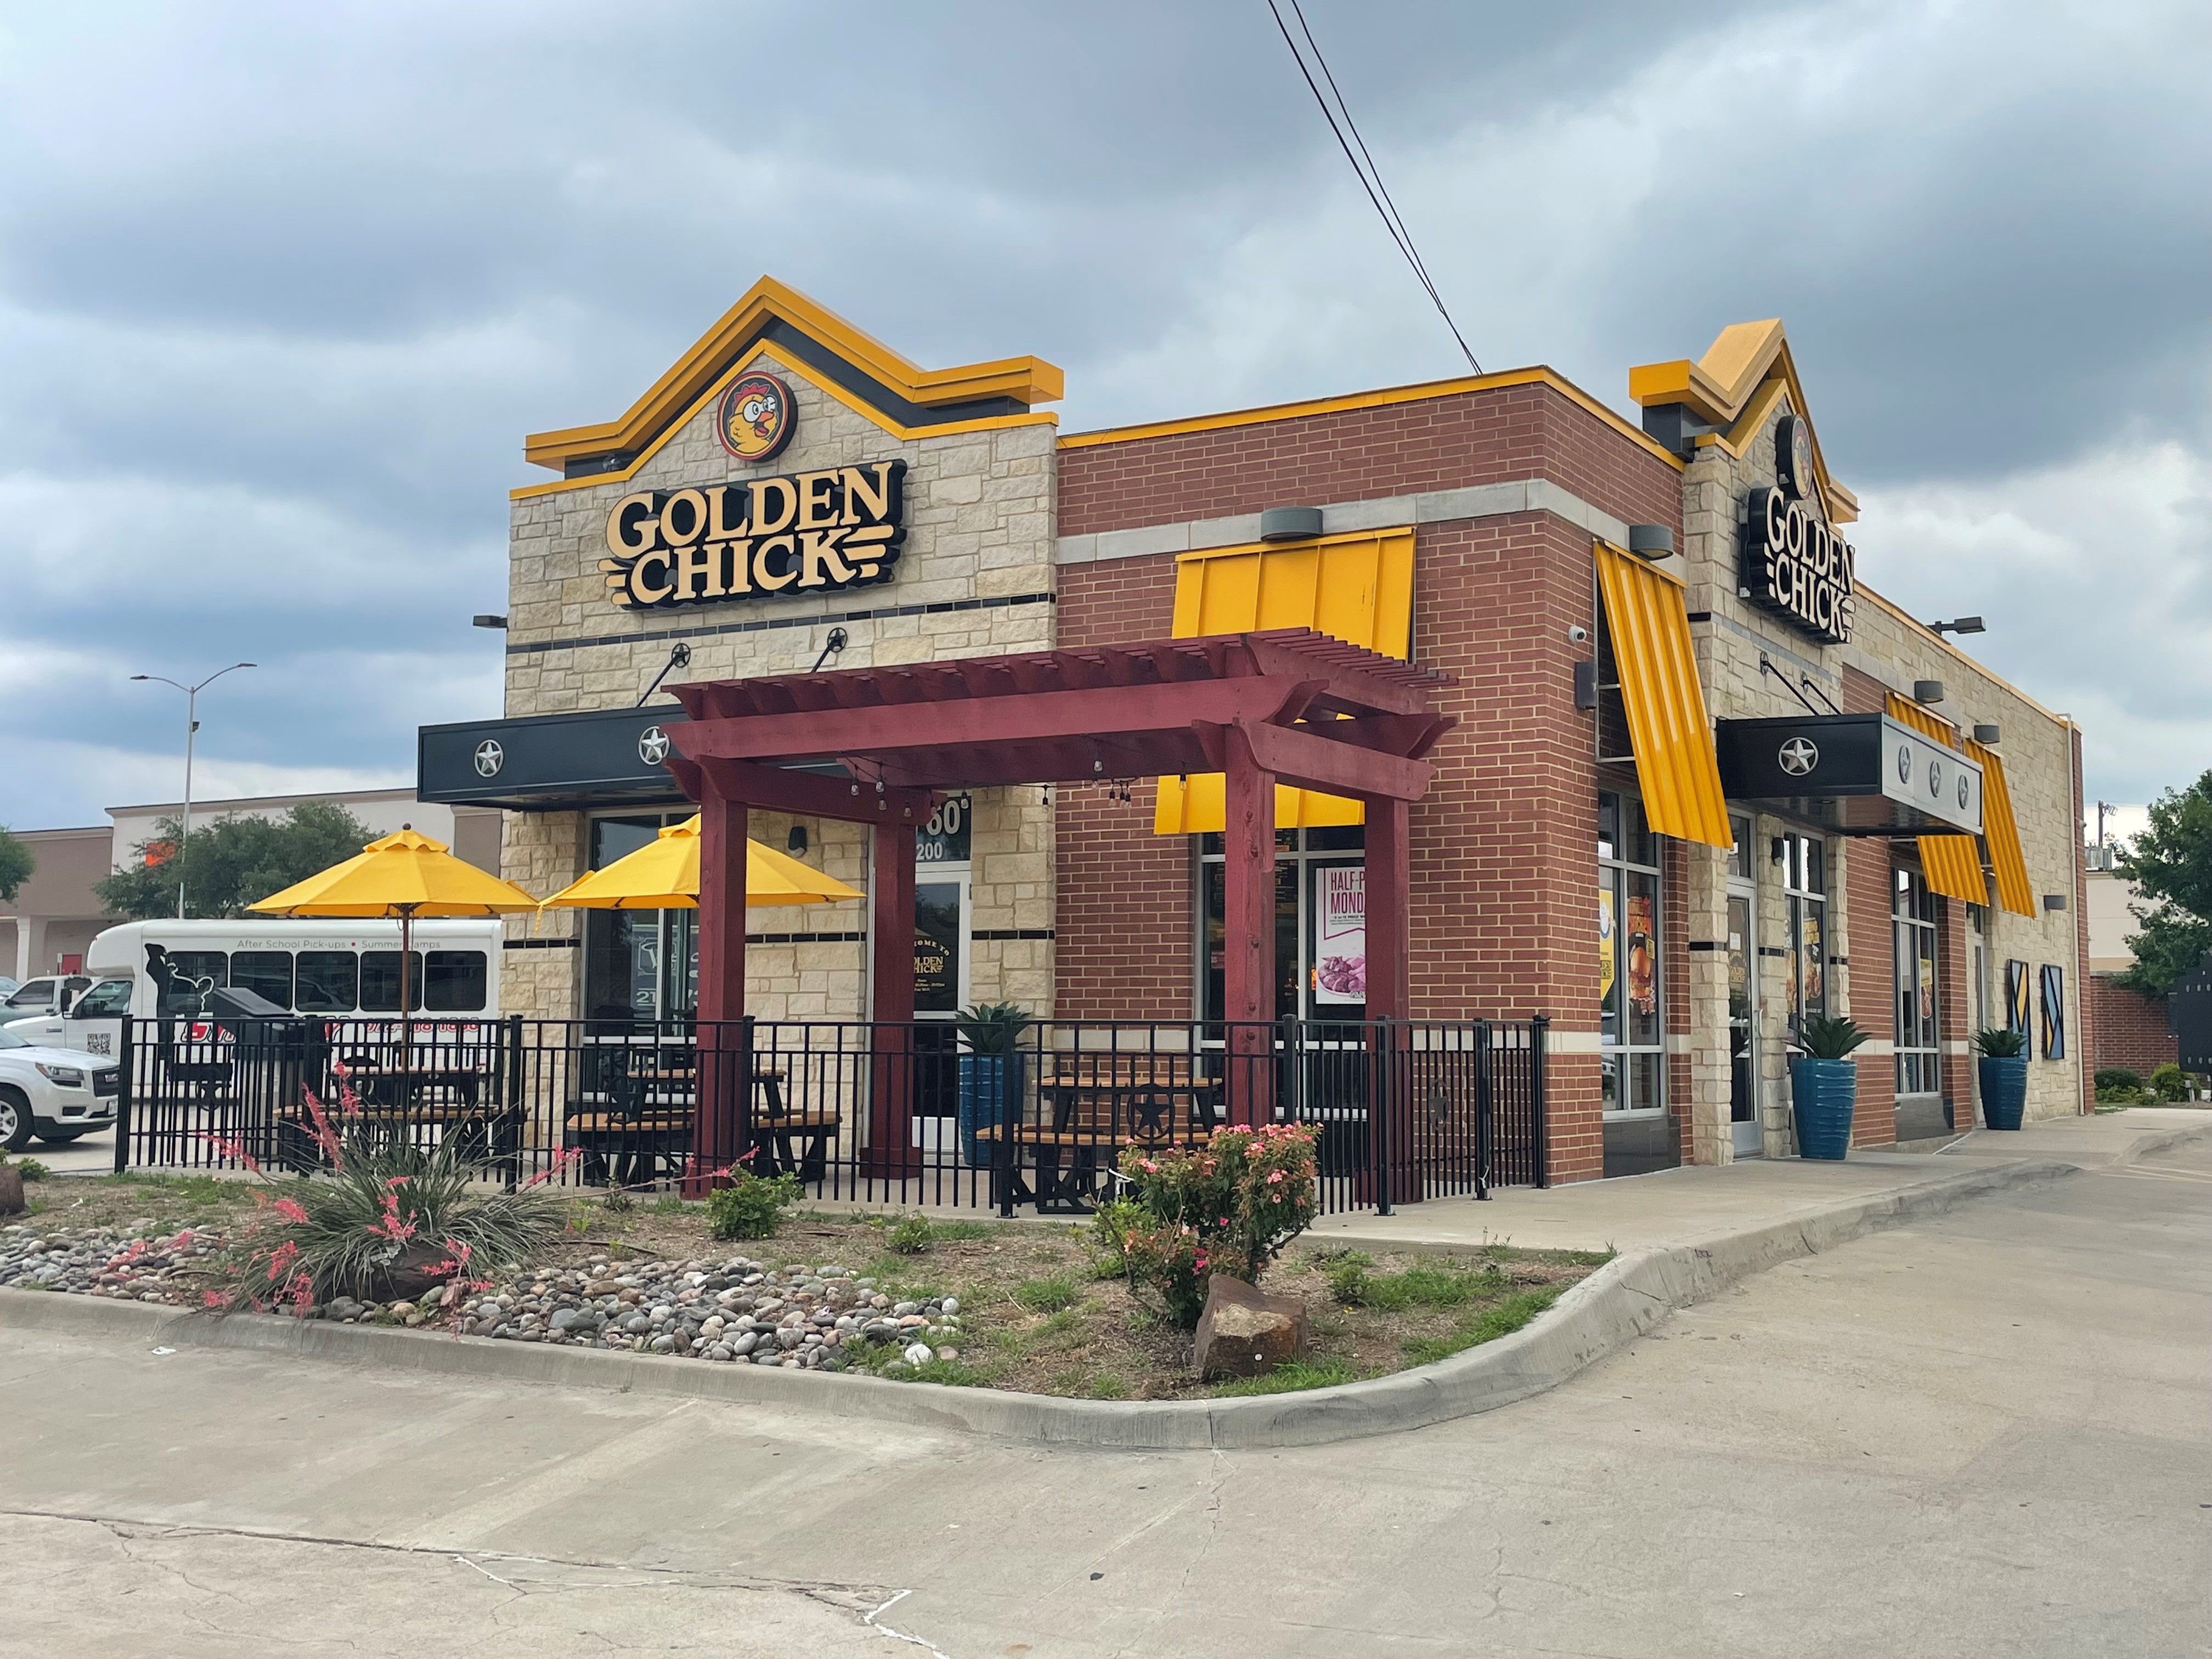 Golden Chick storefront.  Your local Golden Chick fast food restaurant in Carrollton, Texas